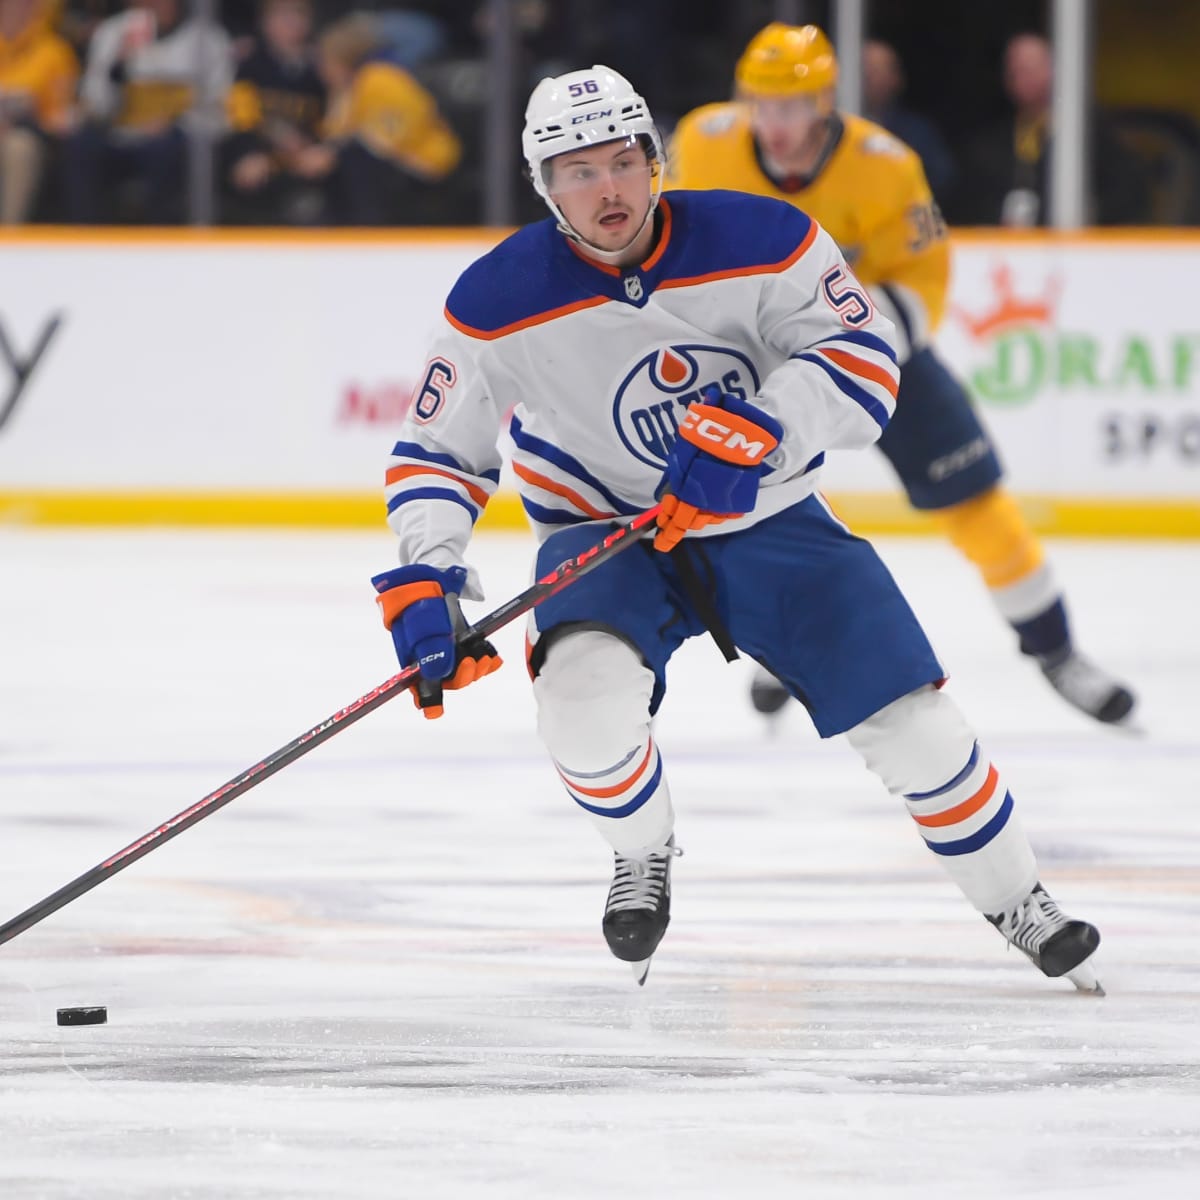 Kailer Yamamoto close to home and playing for Kraken is 'a dream come true